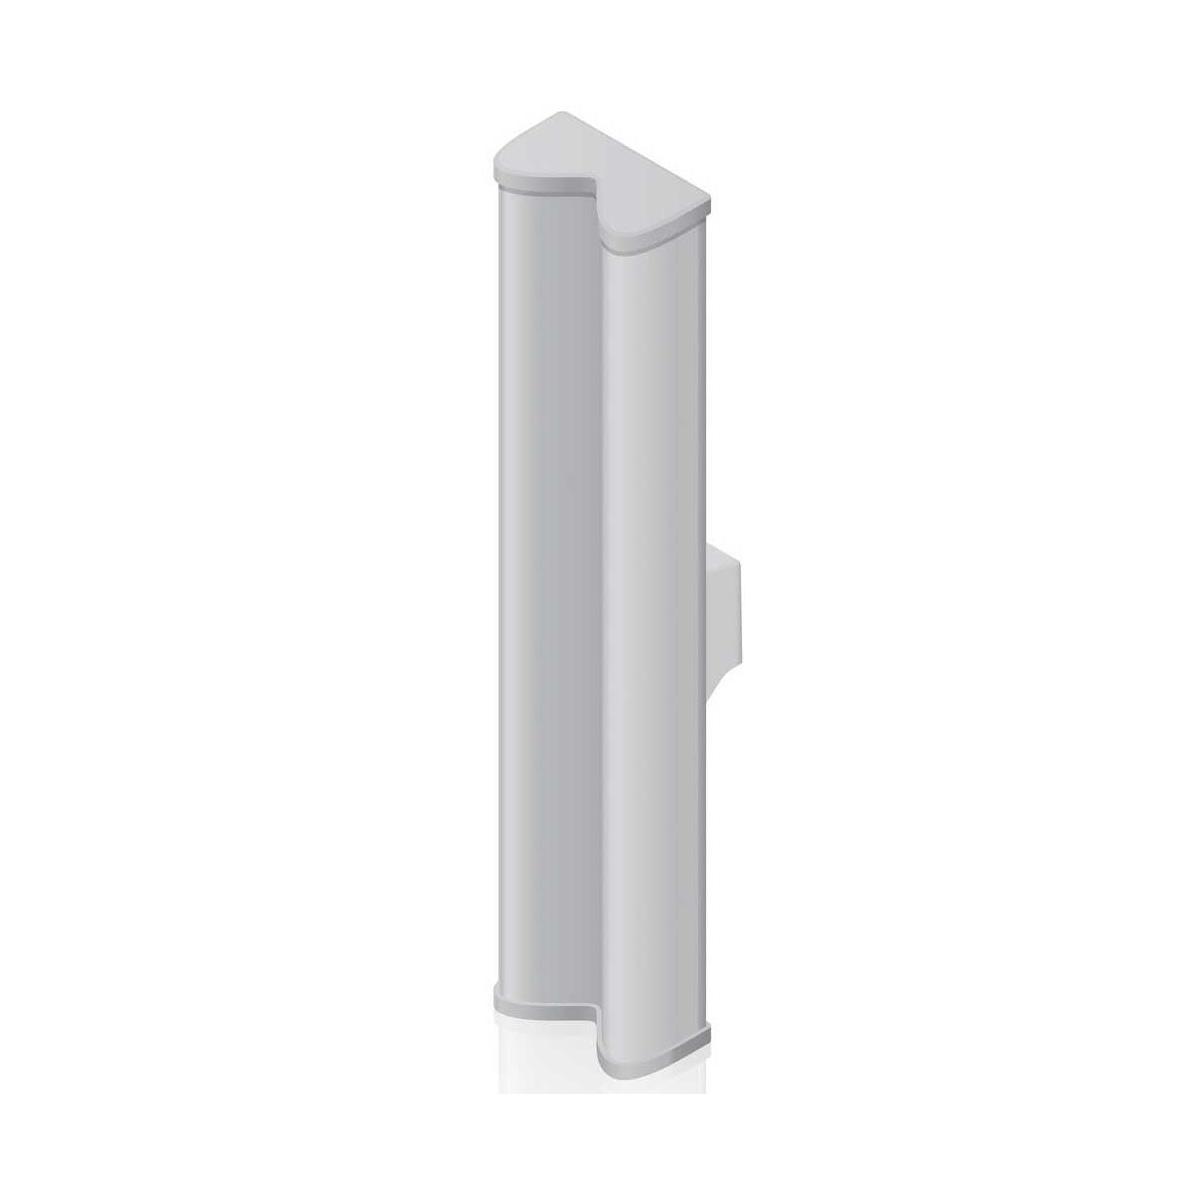 Image of Ubiquiti Networks airMAX 2x2 MIMO Sector Antenna